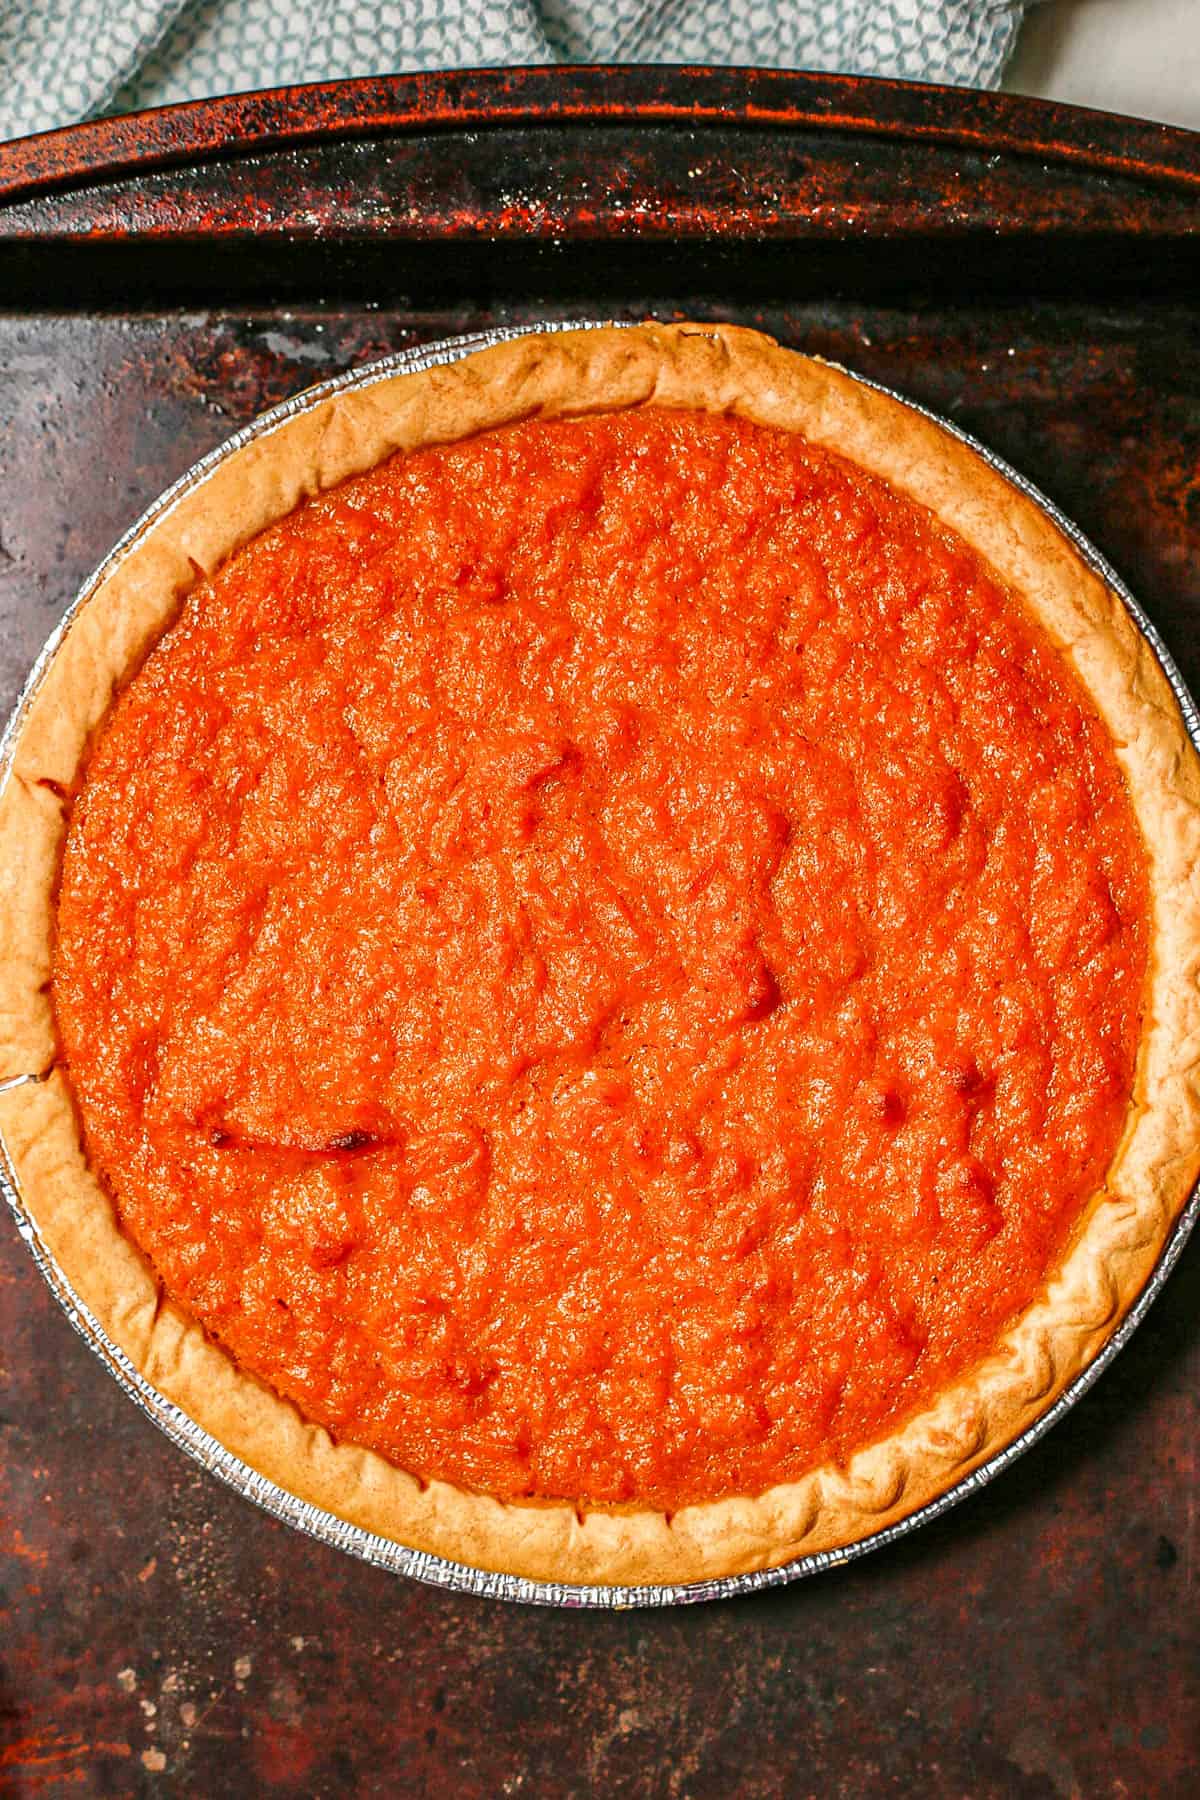 Sweet potato pie on a baking sheet after baking in the oven.